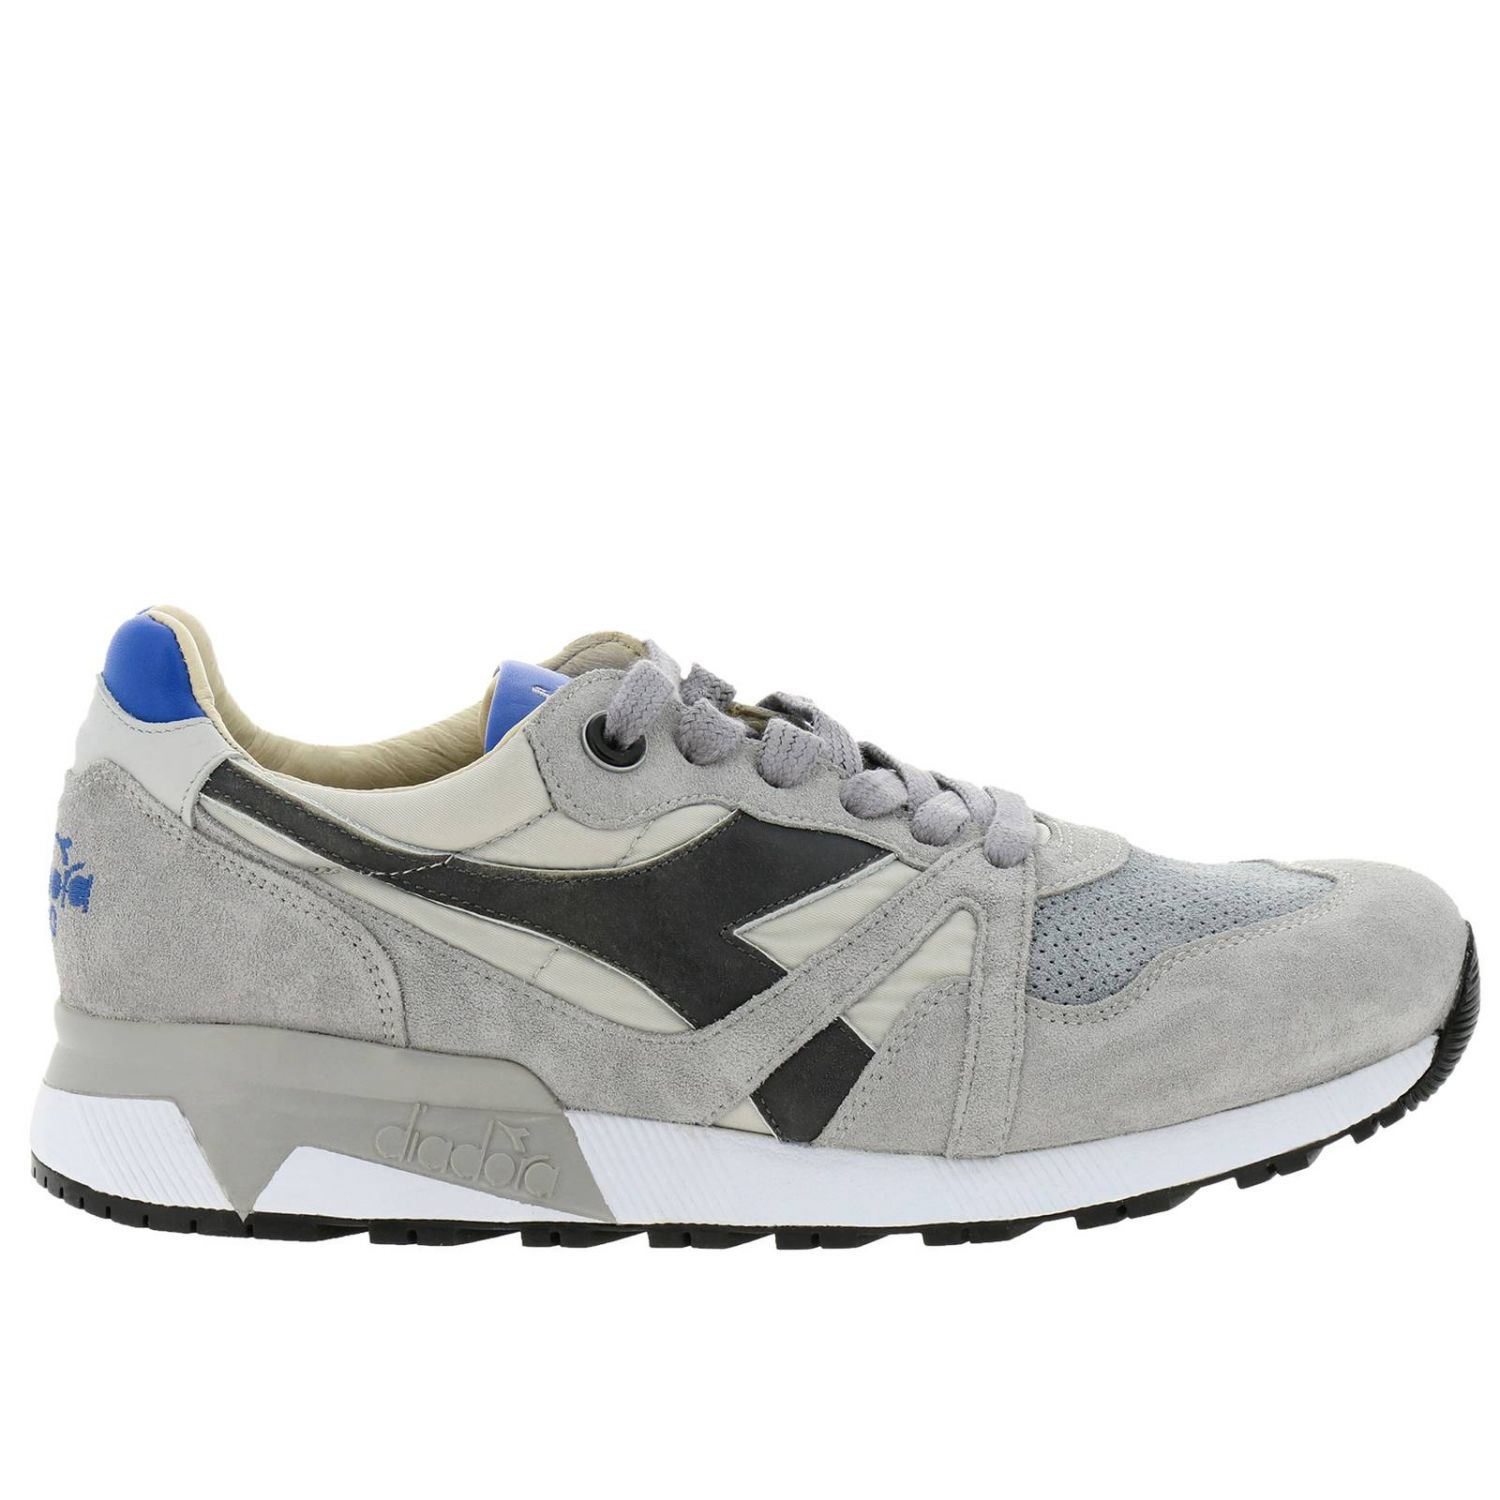 Diadora Heritage Outlet: Sneakers N9000 H s sw in leather, nylon and ...